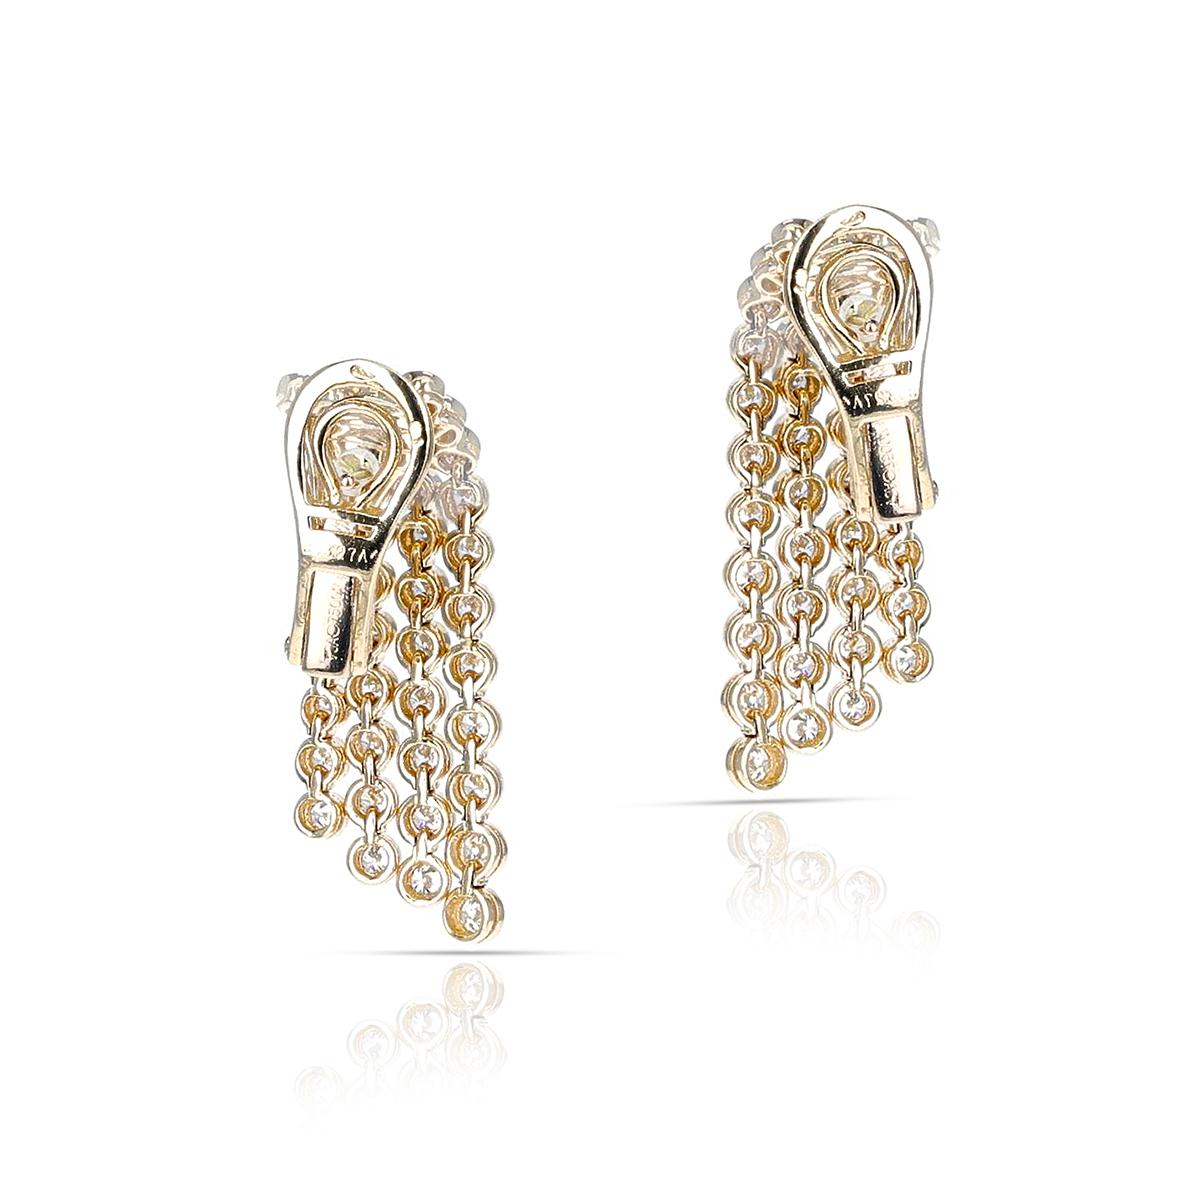 A beautiful pair of elegant Van Cleef & Arpels Four Line Diamond Cocktail Earrings made in 18K Yellow Gold. The length is 1.30